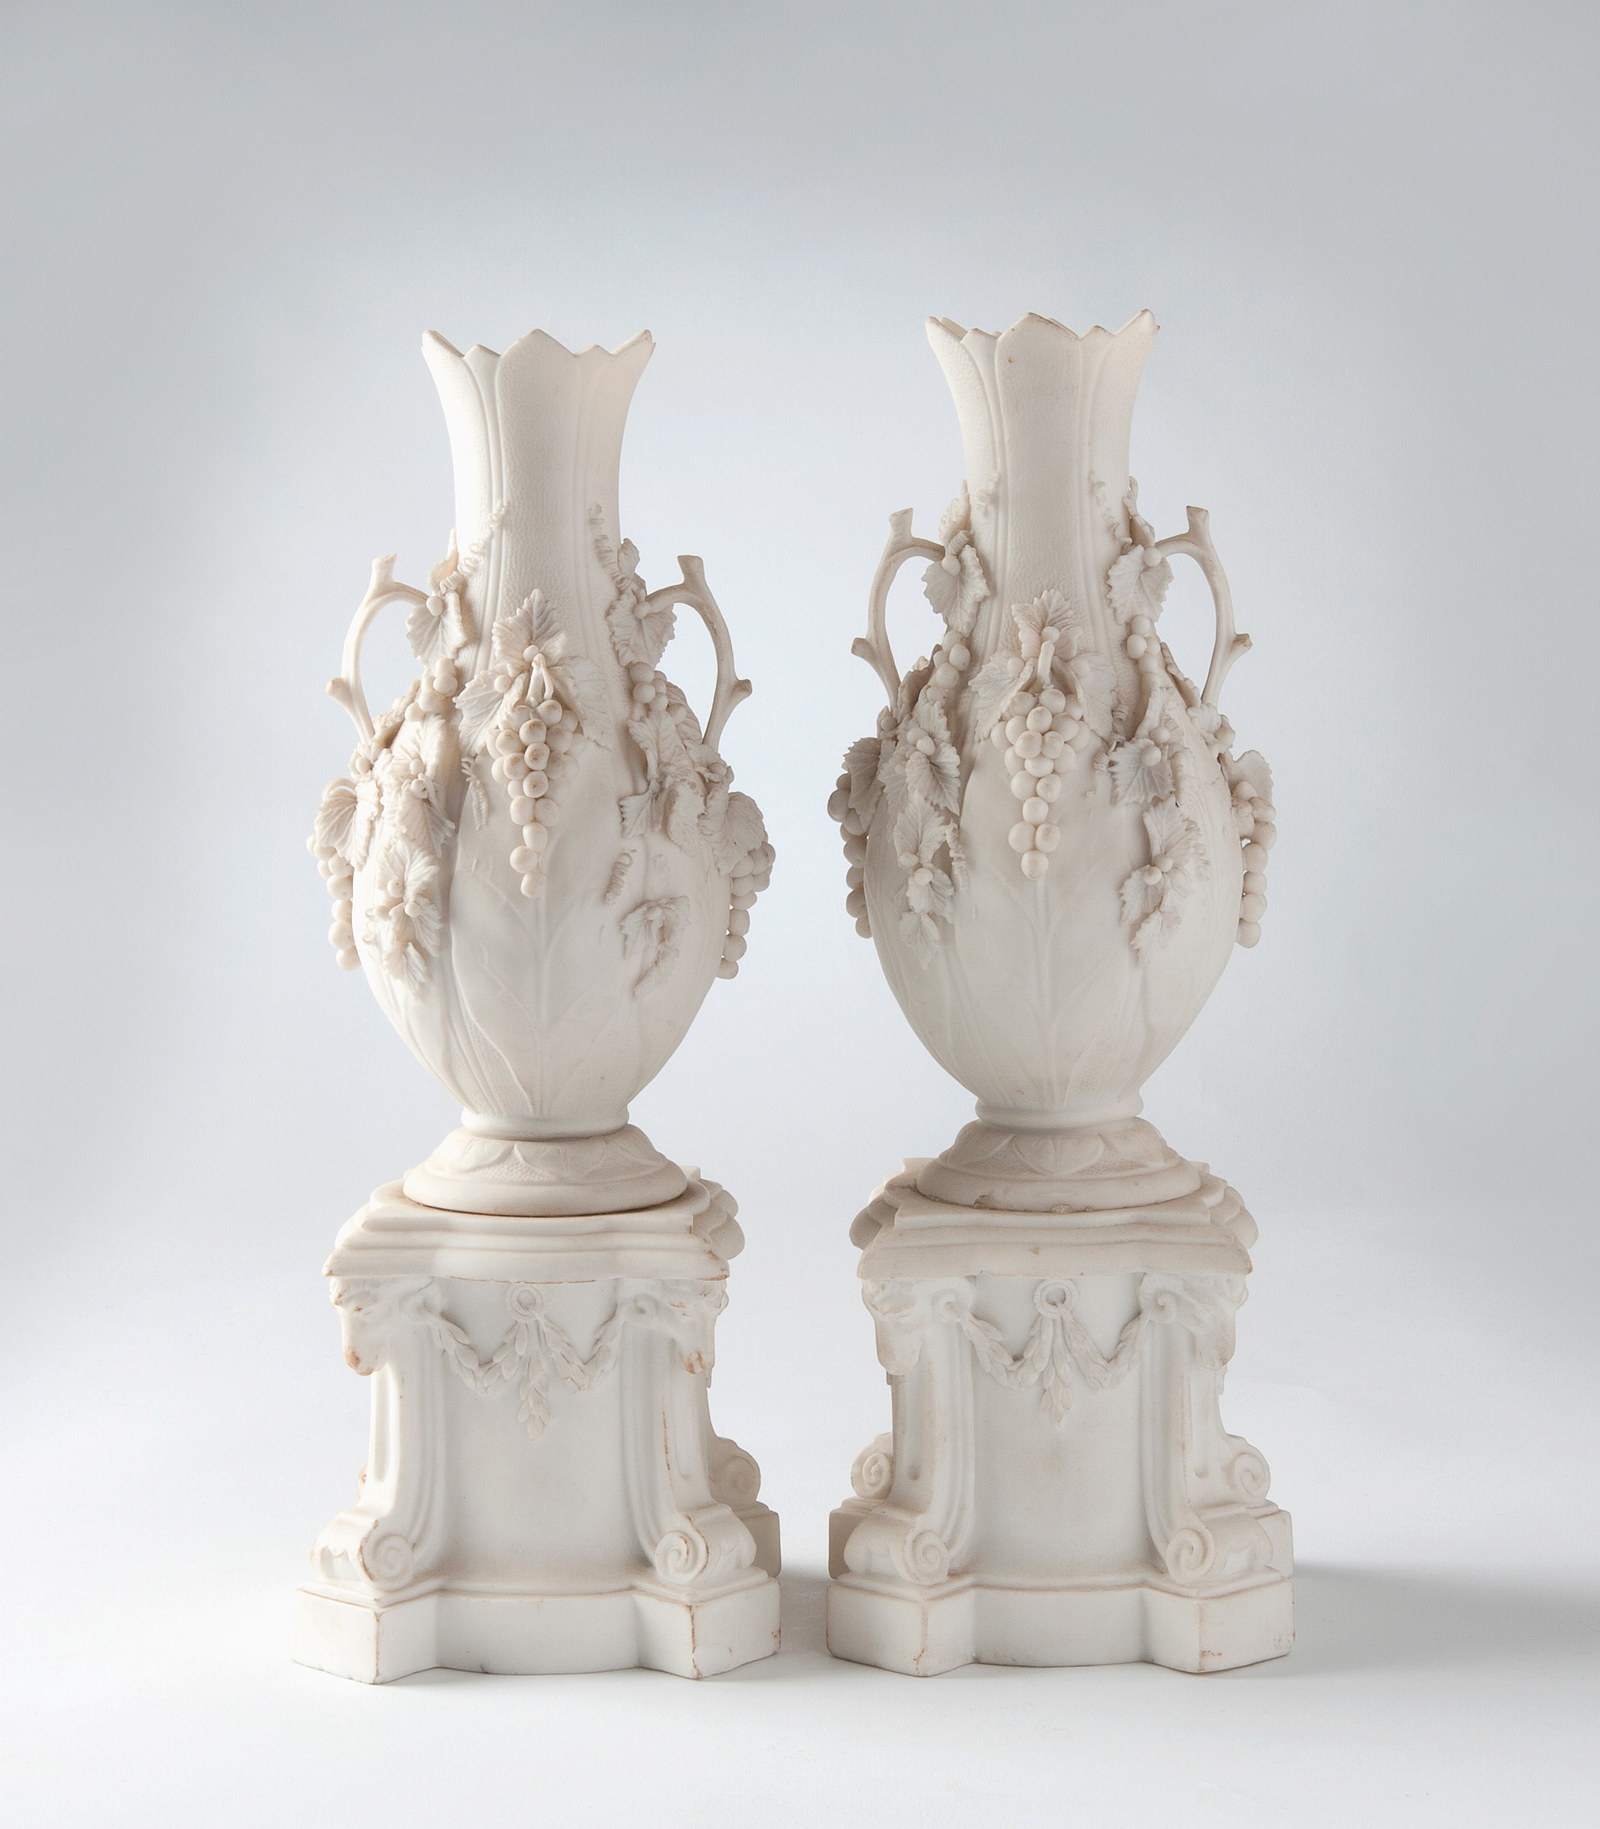 Shaped pedestal base with corners decorated with scrolls to the foot and ram's heads to the upper edge liked by applied swags; the vase with circular flaring foot, ovoid body and long, narrow neck, rim with pointed edge. Pair of handles in the form of bra